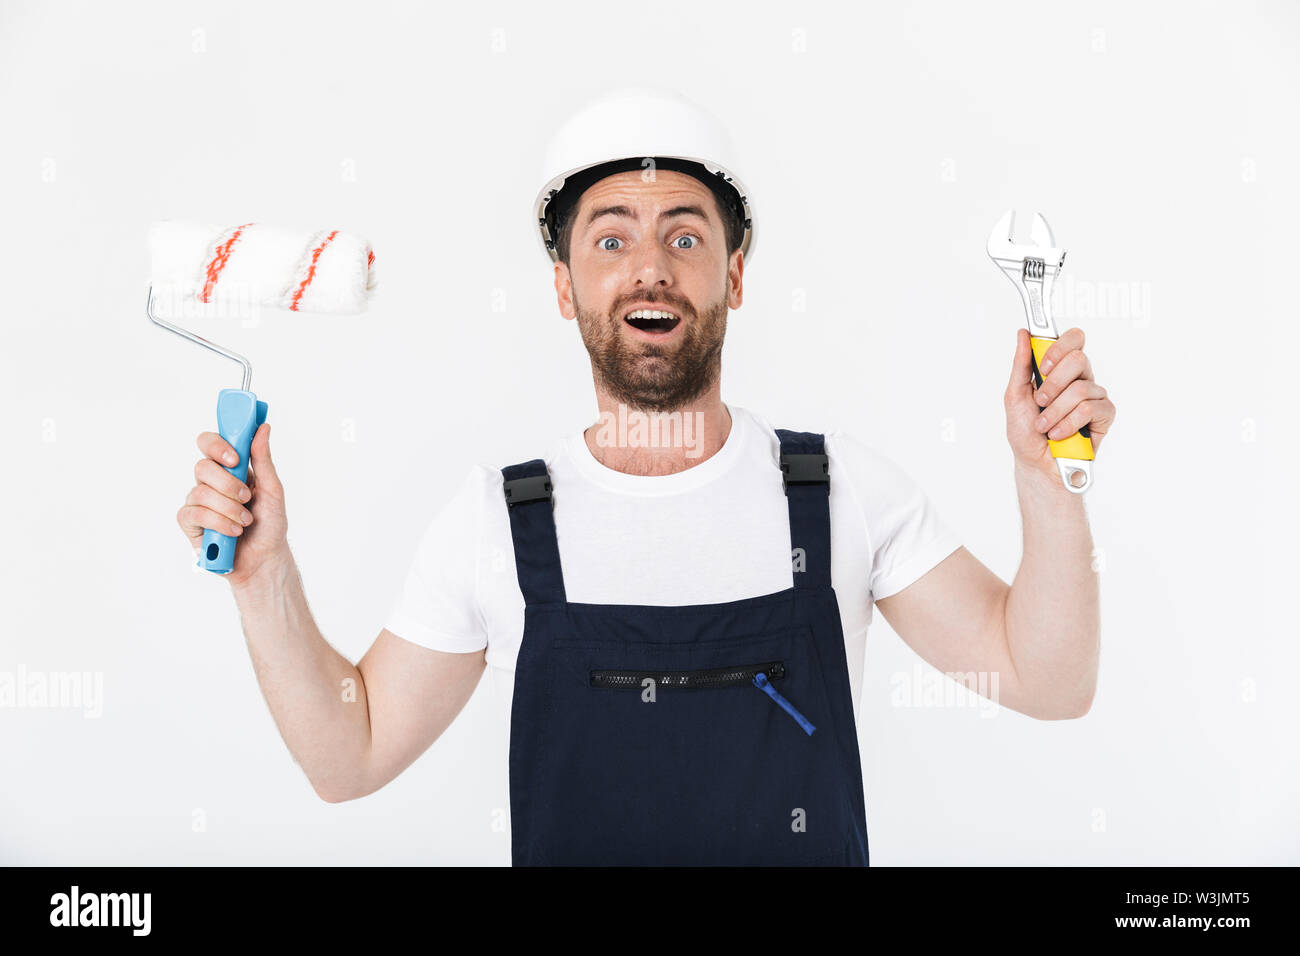 Confident Bearded Builder Man Wearing Overalls And Hardhat